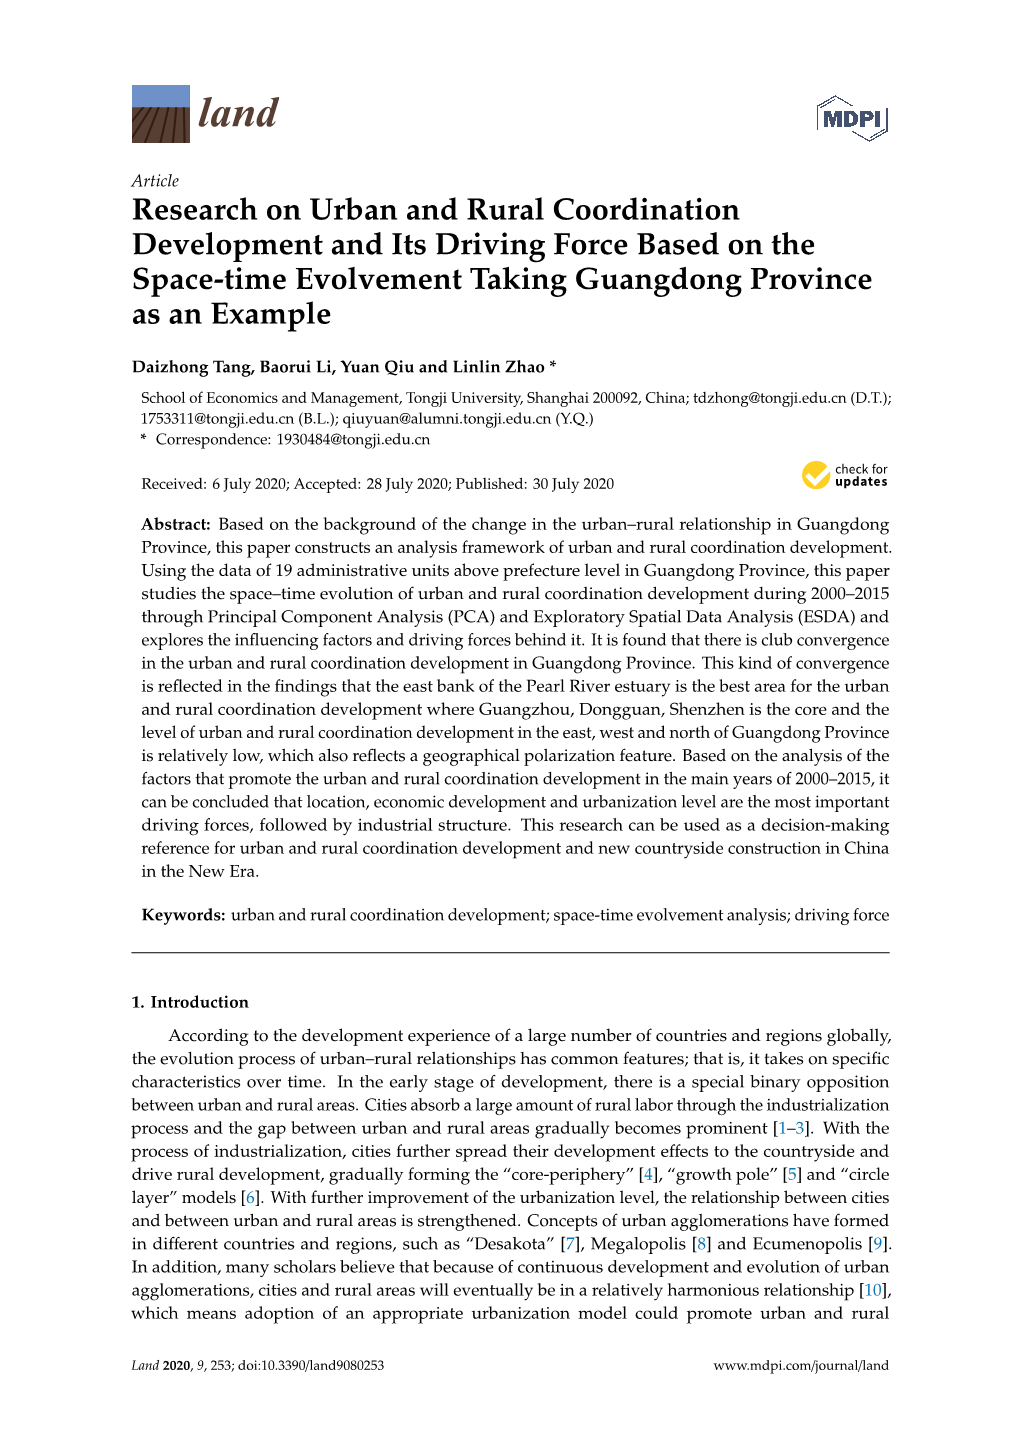 Research on Urban and Rural Coordination Development and Its Driving Force Based on the Space-Time Evolvement Taking Guangdong Province As an Example